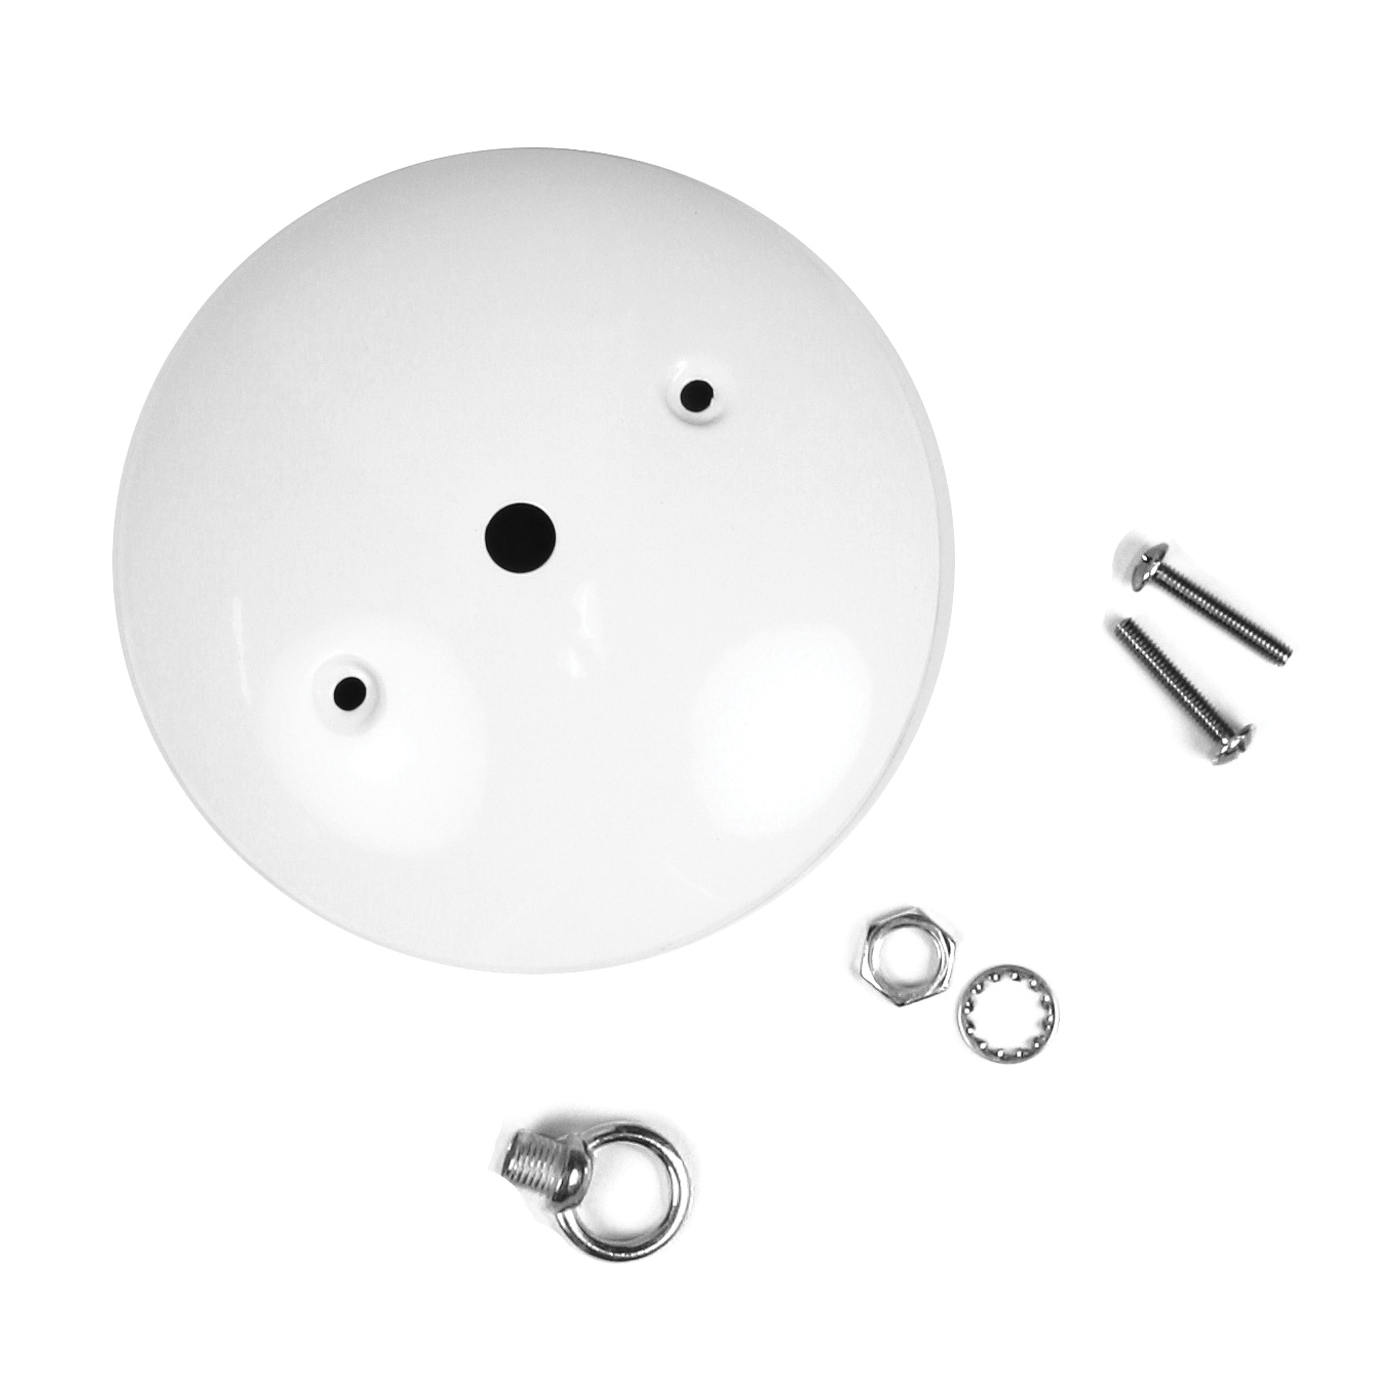 60211 Canopy Kit, Ceiling, White, For: Outlet Box and Hang Ceiling Fixture